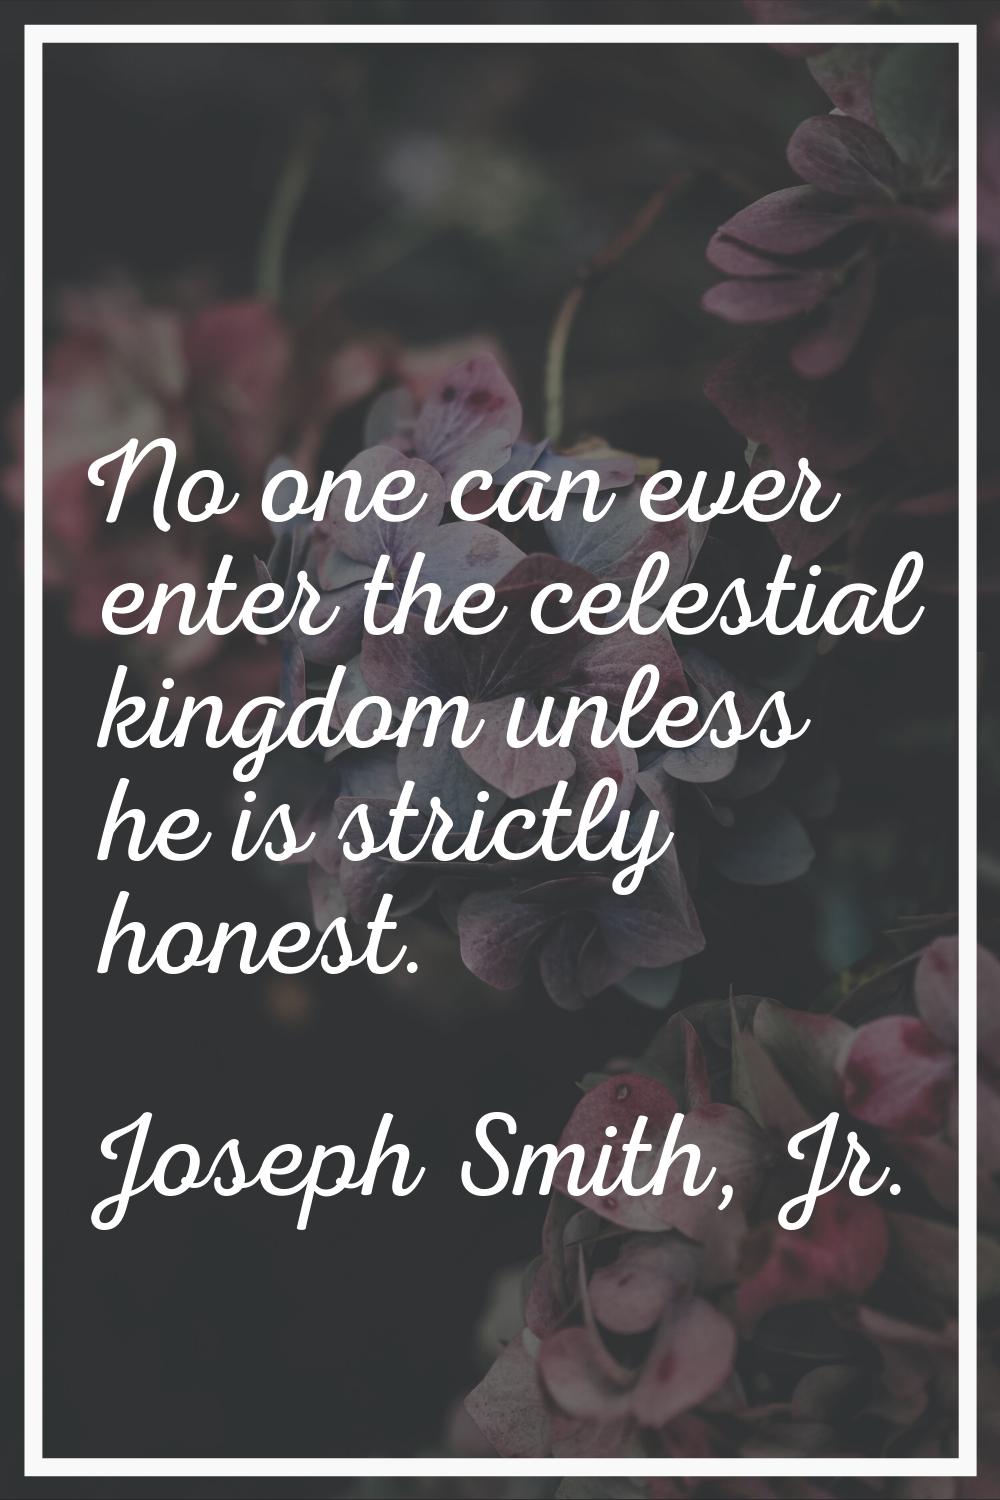 No one can ever enter the celestial kingdom unless he is strictly honest.